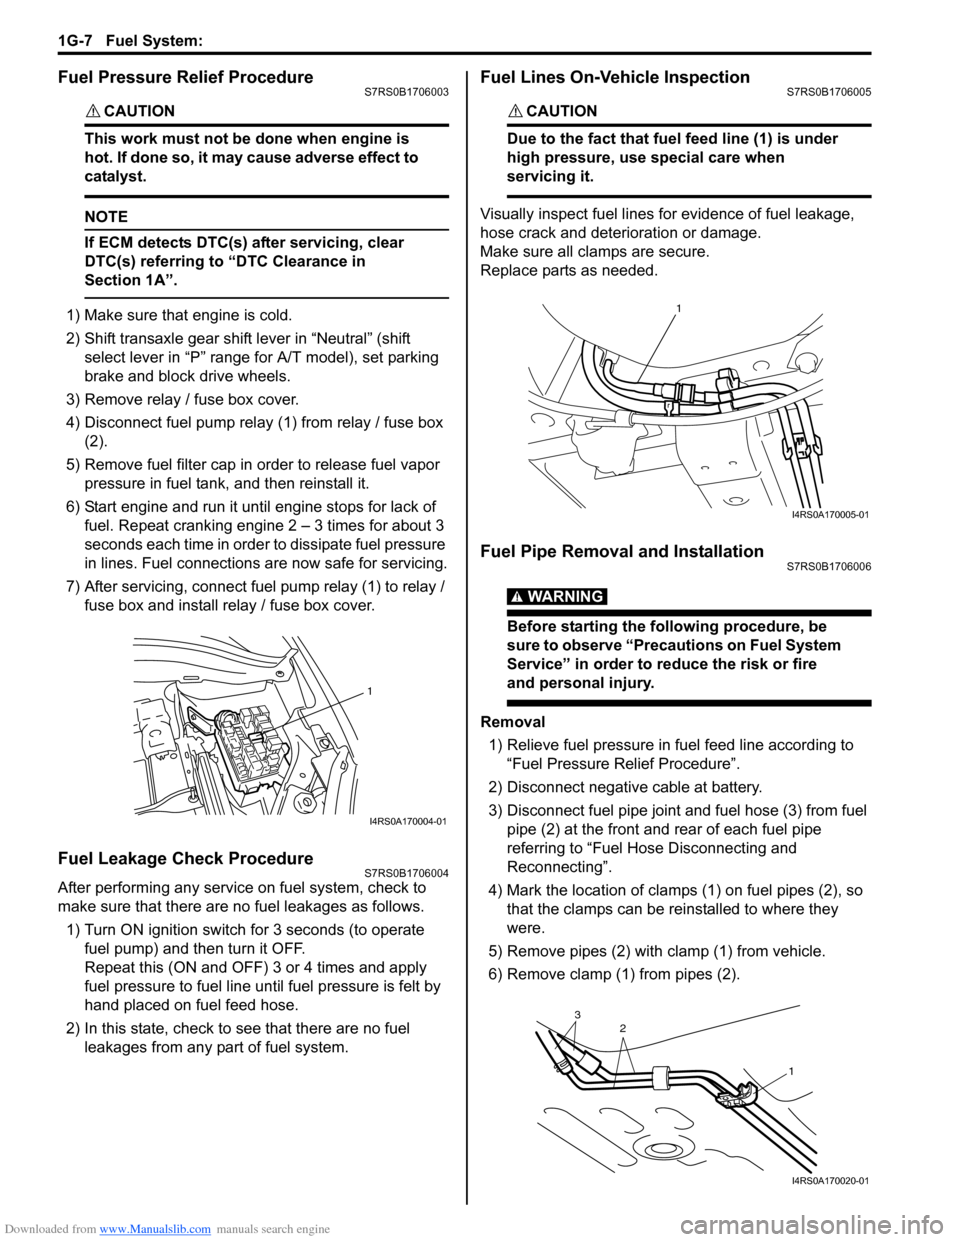 SUZUKI SWIFT 2005 2.G Service Workshop Manual Downloaded from www.Manualslib.com manuals search engine 1G-7 Fuel System: 
Fuel Pressure Relief ProcedureS7RS0B1706003
CAUTION! 
This work must not be done when engine is 
hot. If done so, it may cau